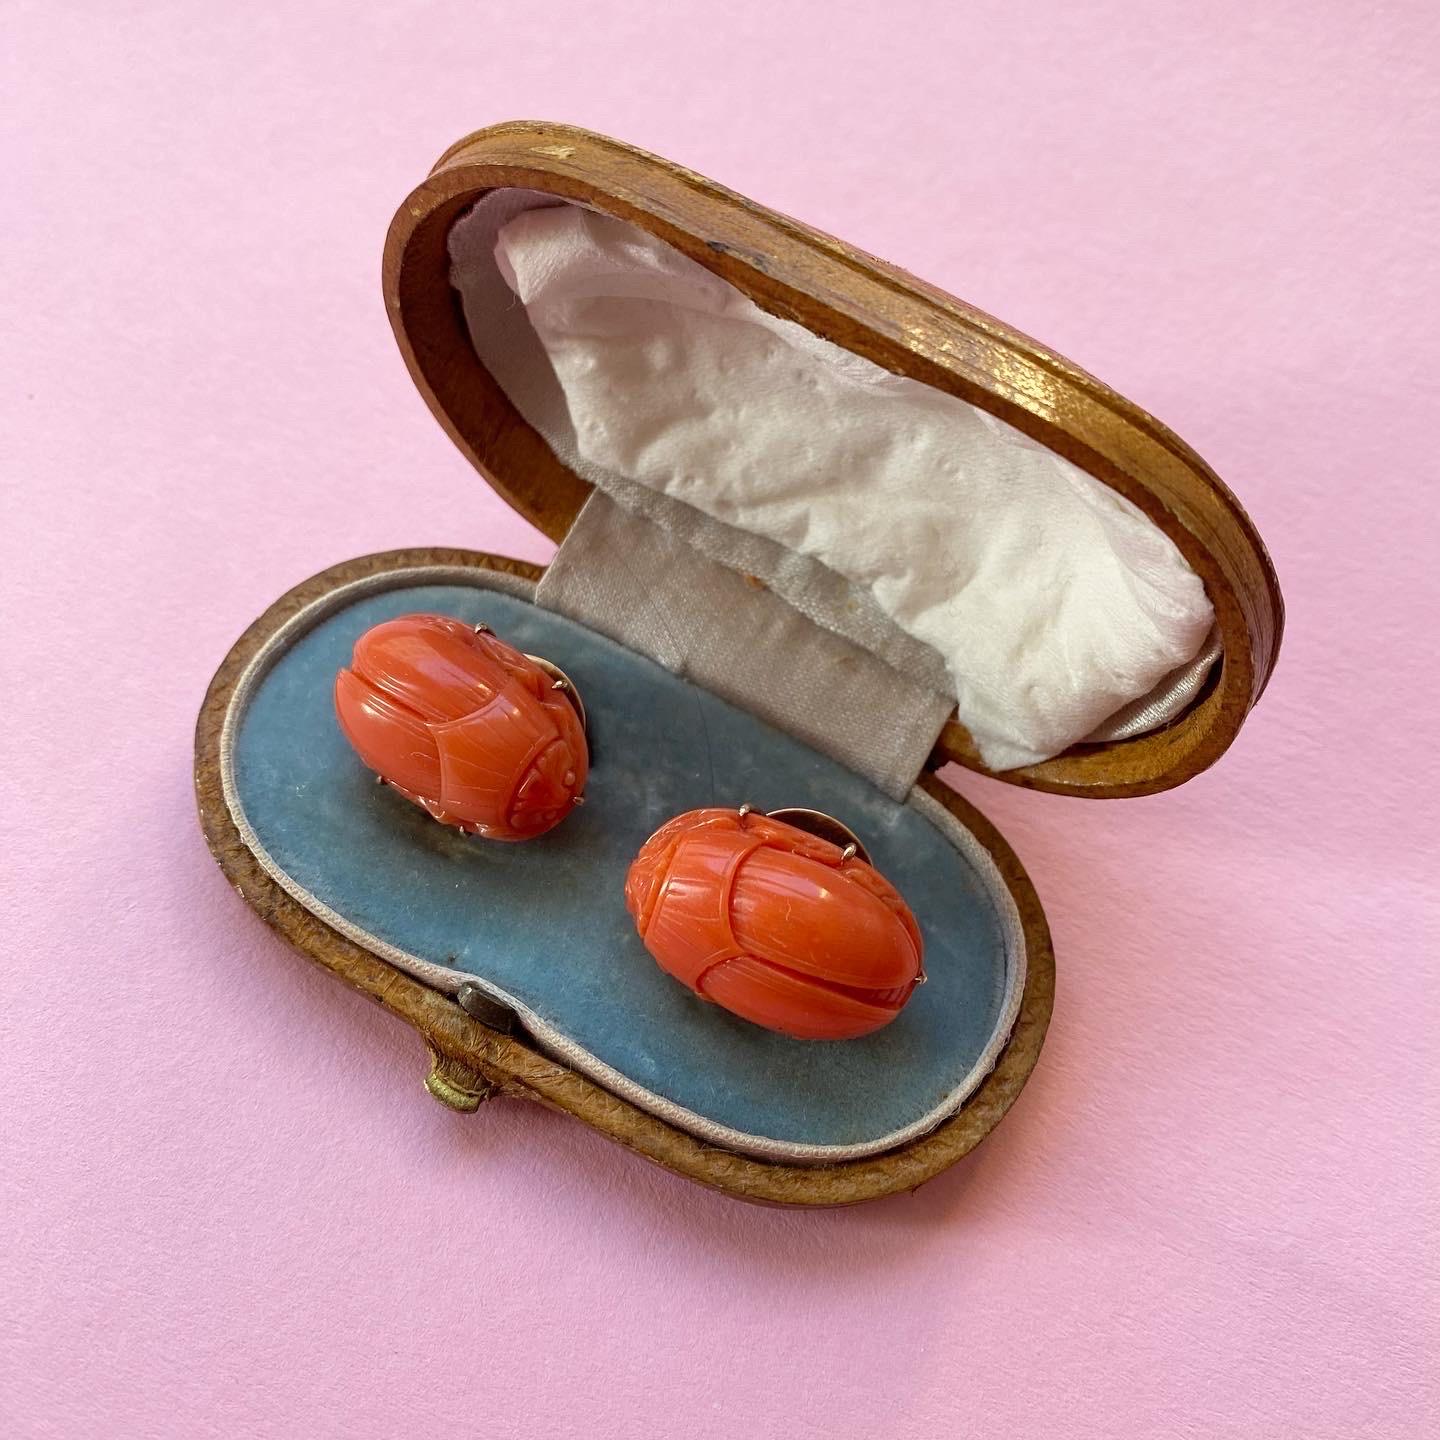 A pair of coral scarab cufflinks or studs with gold mountings in original case, England or Italy, 19th century.

weight: 14.4 grams
dimensions scarab: 2.4 x 1.5 cm